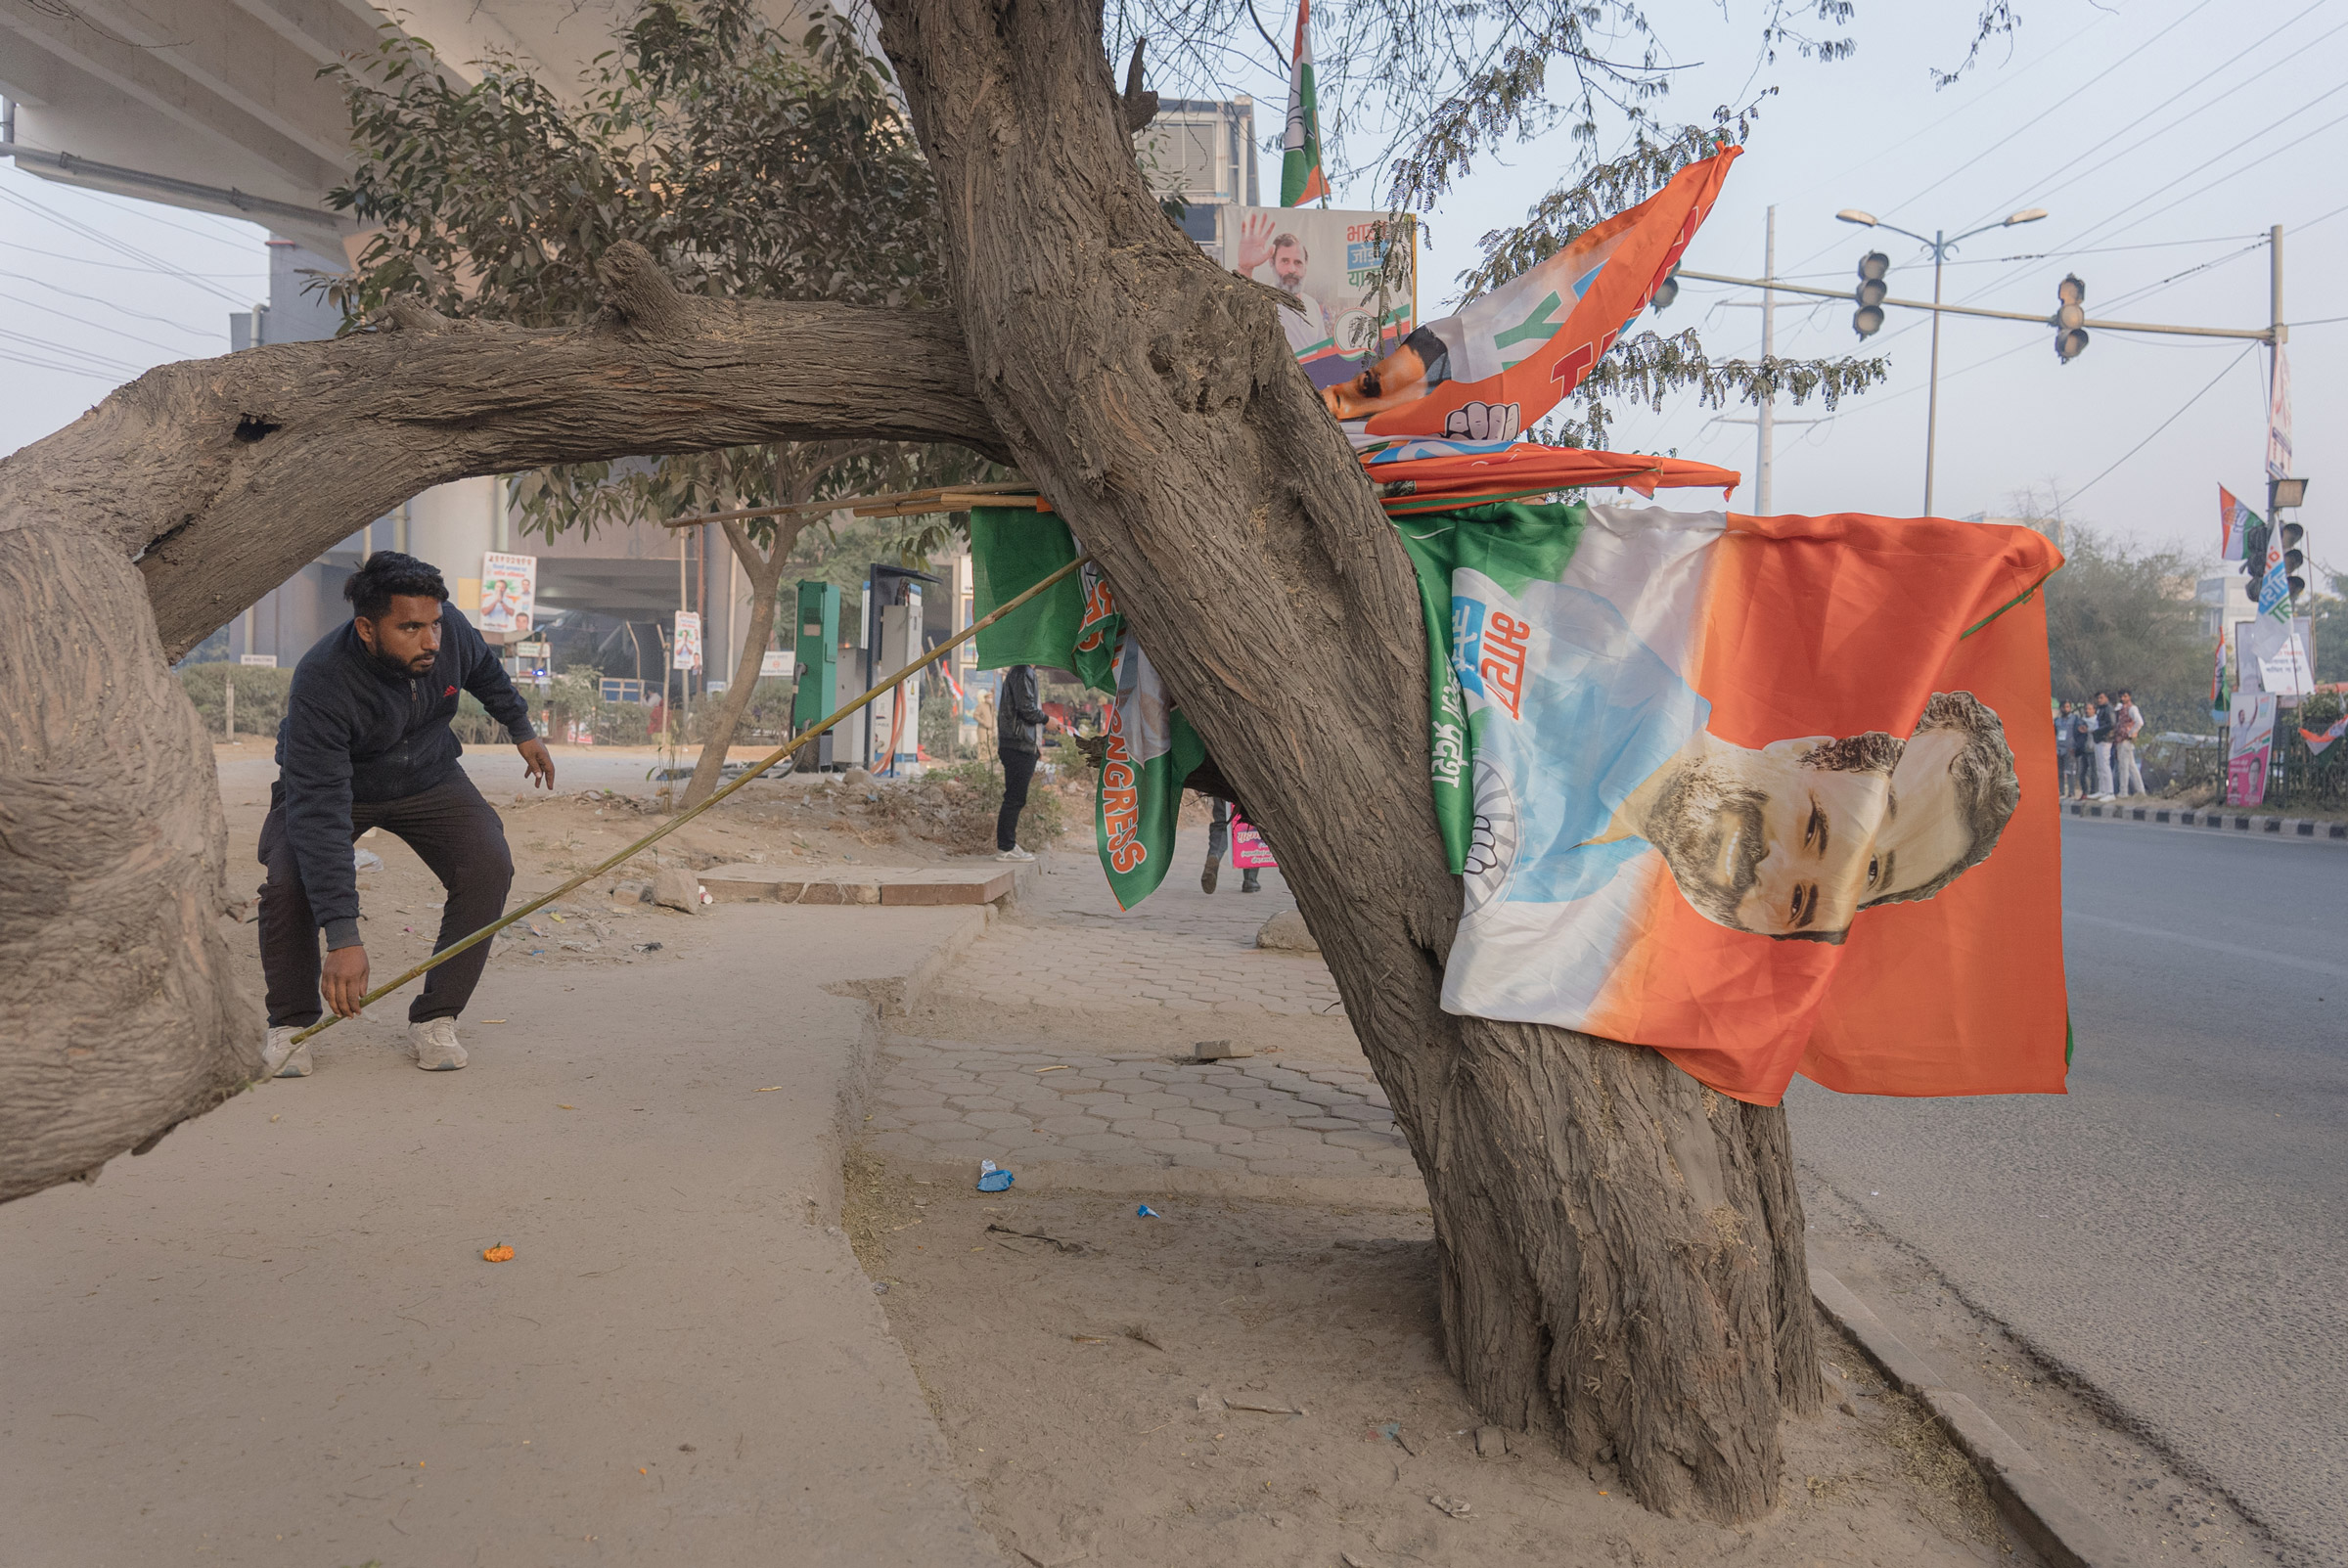 A supporter of the Congress Party gathers flags in New Delhi, India, on Dec. 24, 2022. (Ronny Sen for TIME)